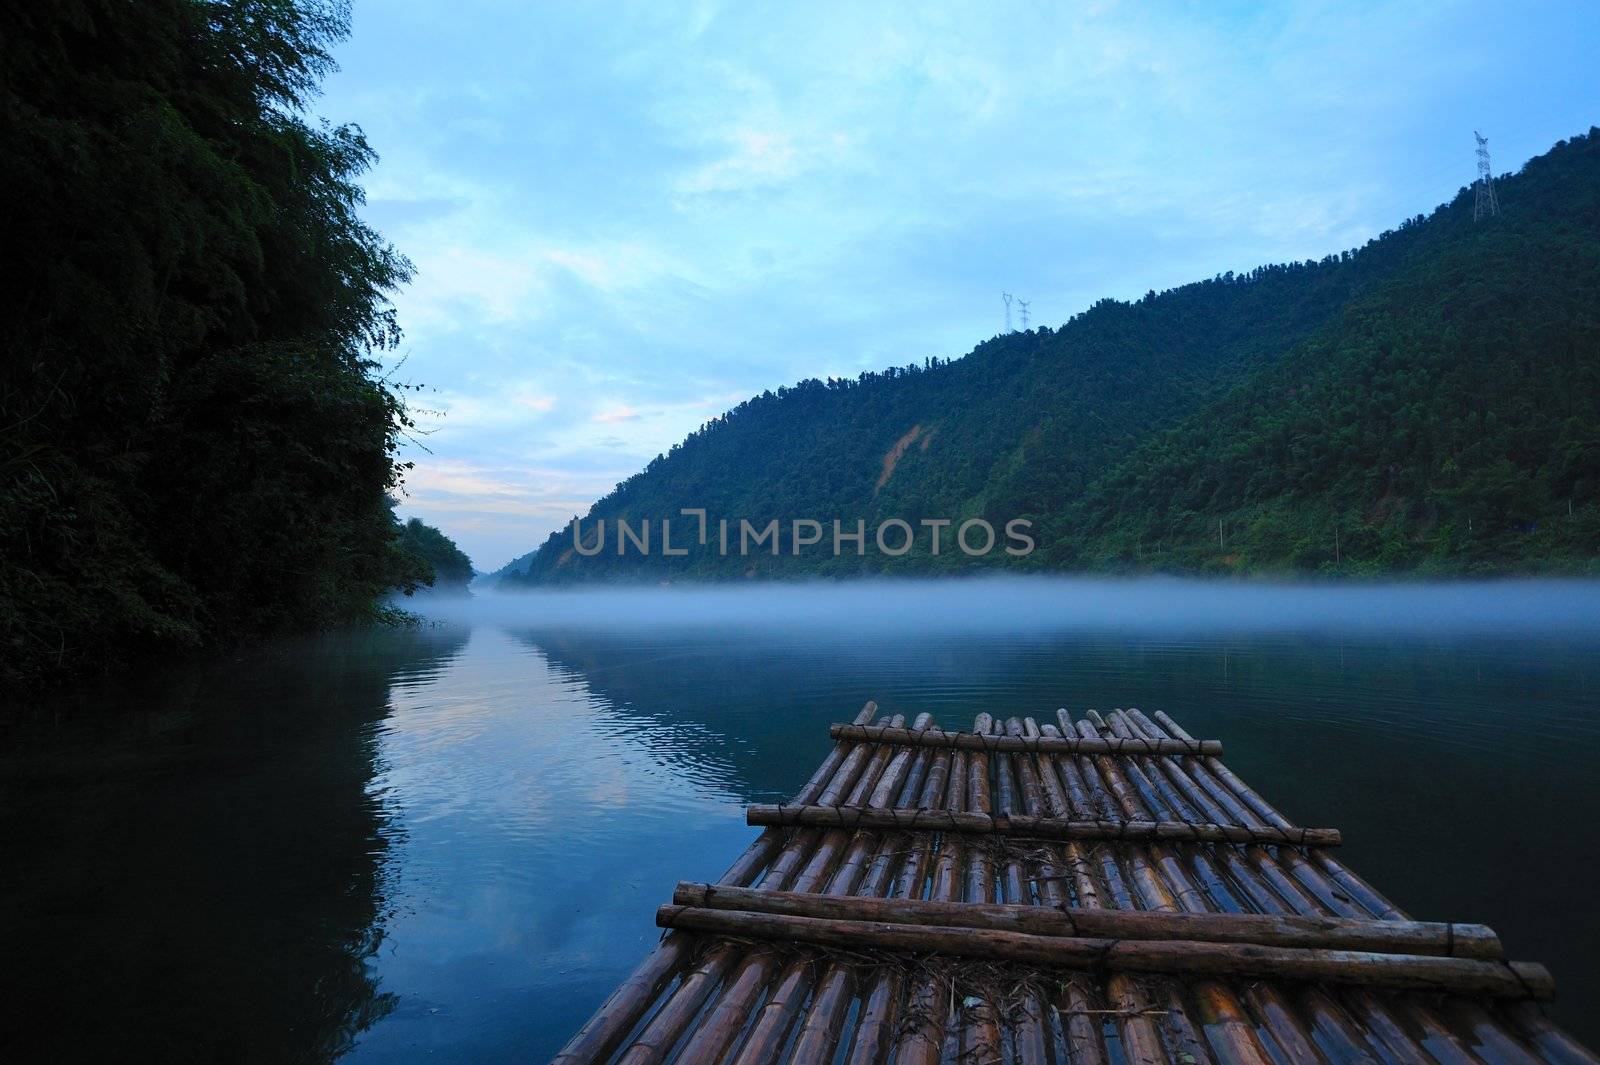 River landscape at sunset with fog rolling across the chilly river water, photo taken in Hunan province of China